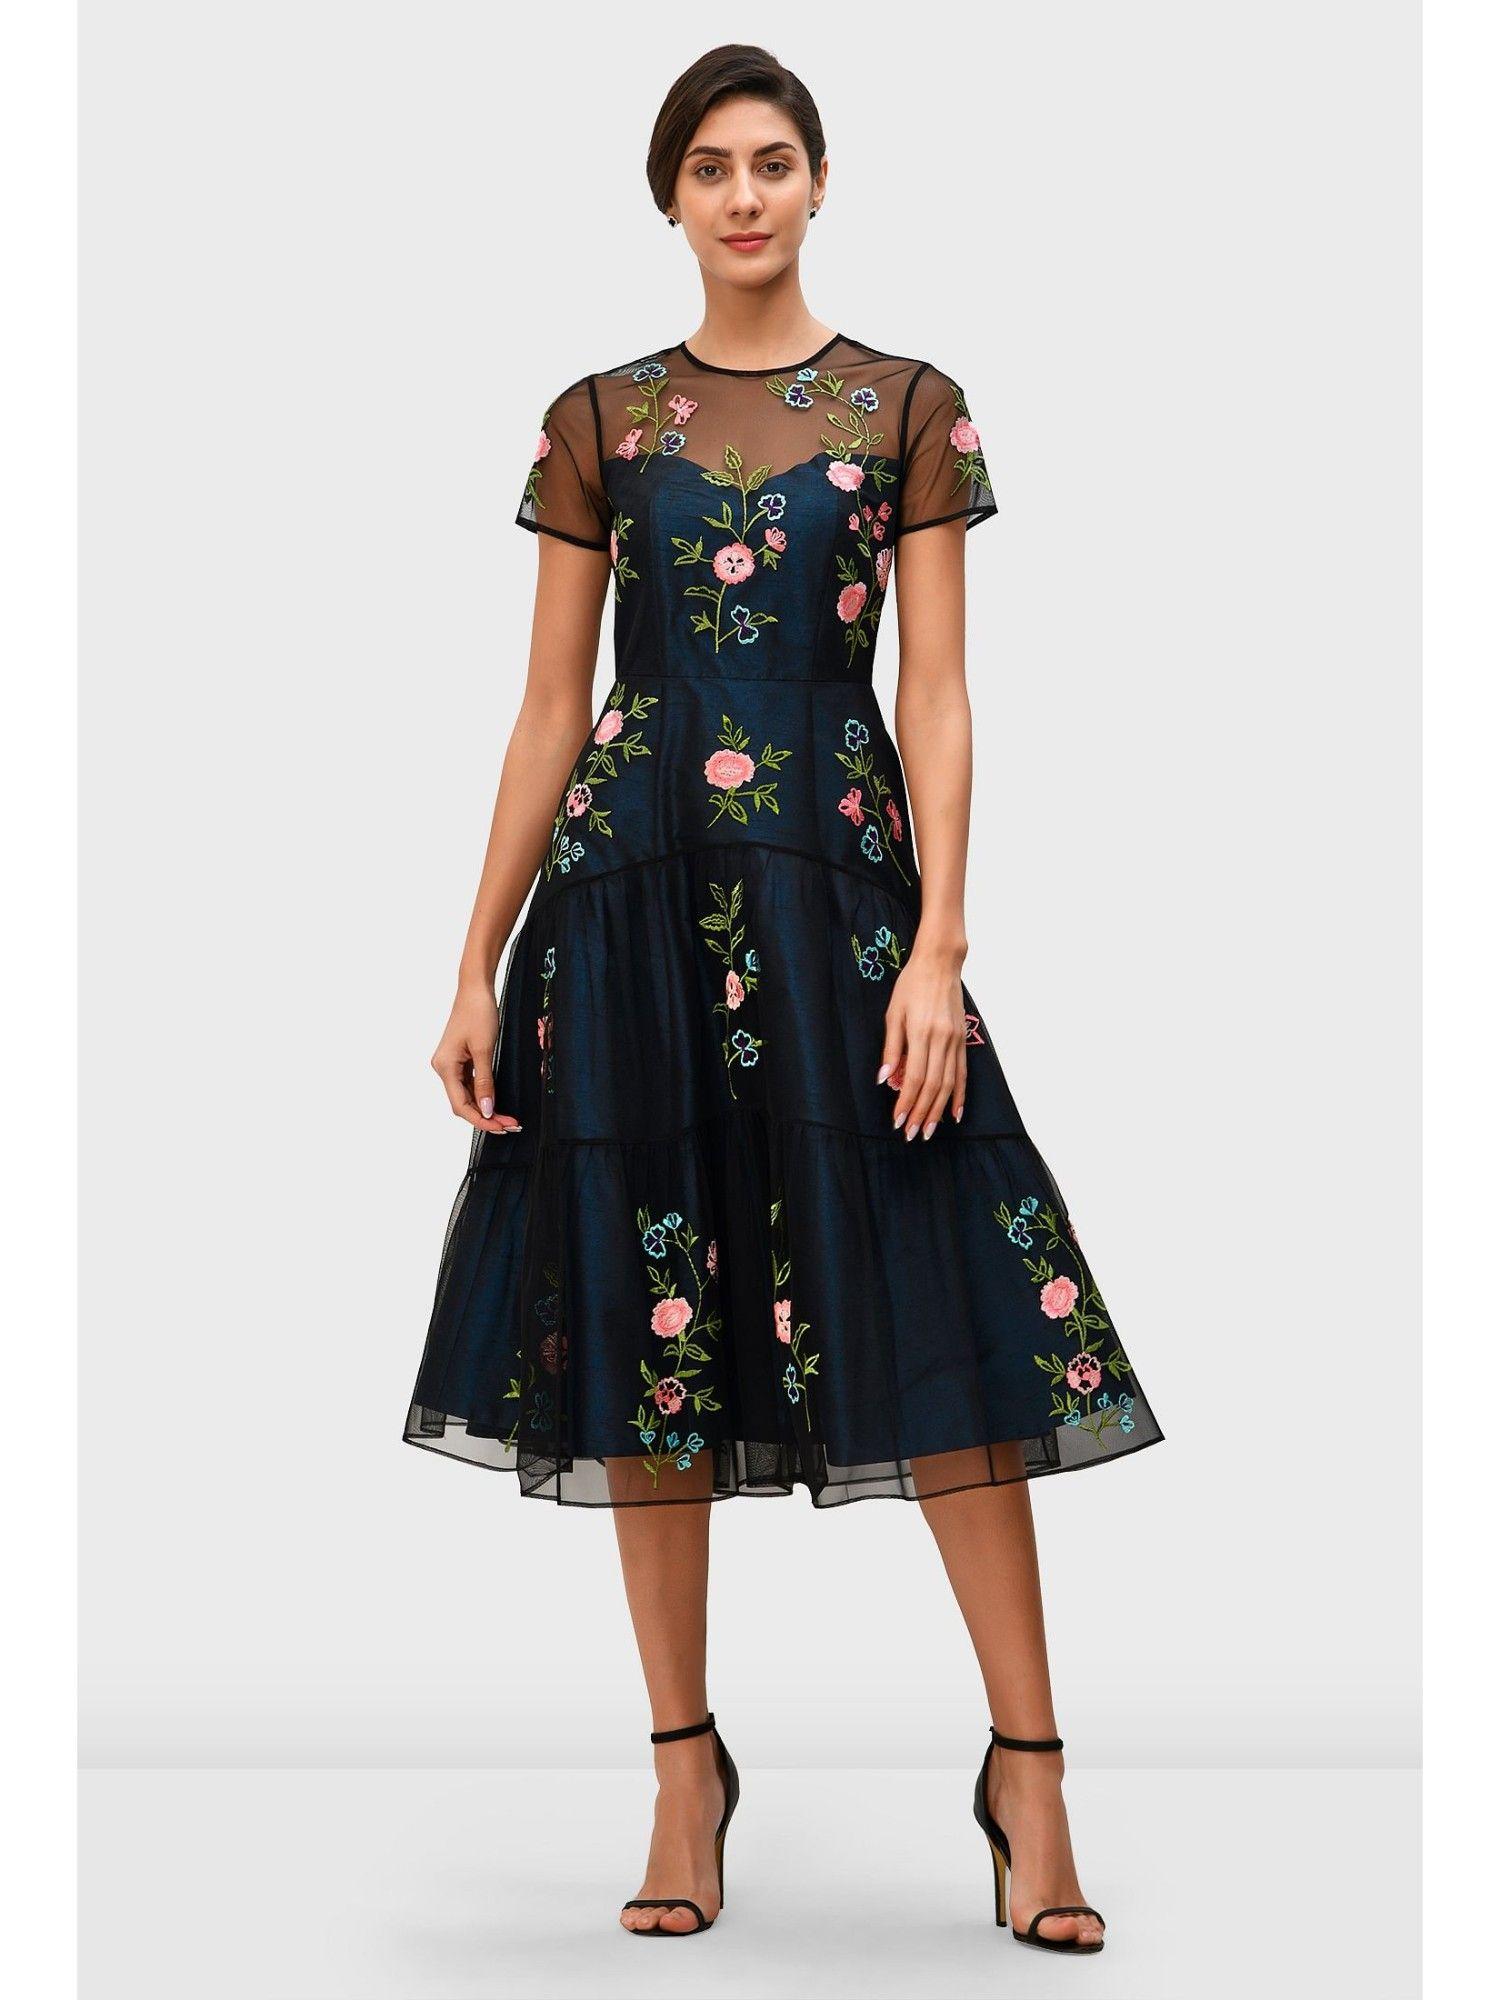 floral-embroidery-illusion-tulle-and-dupioni-dress